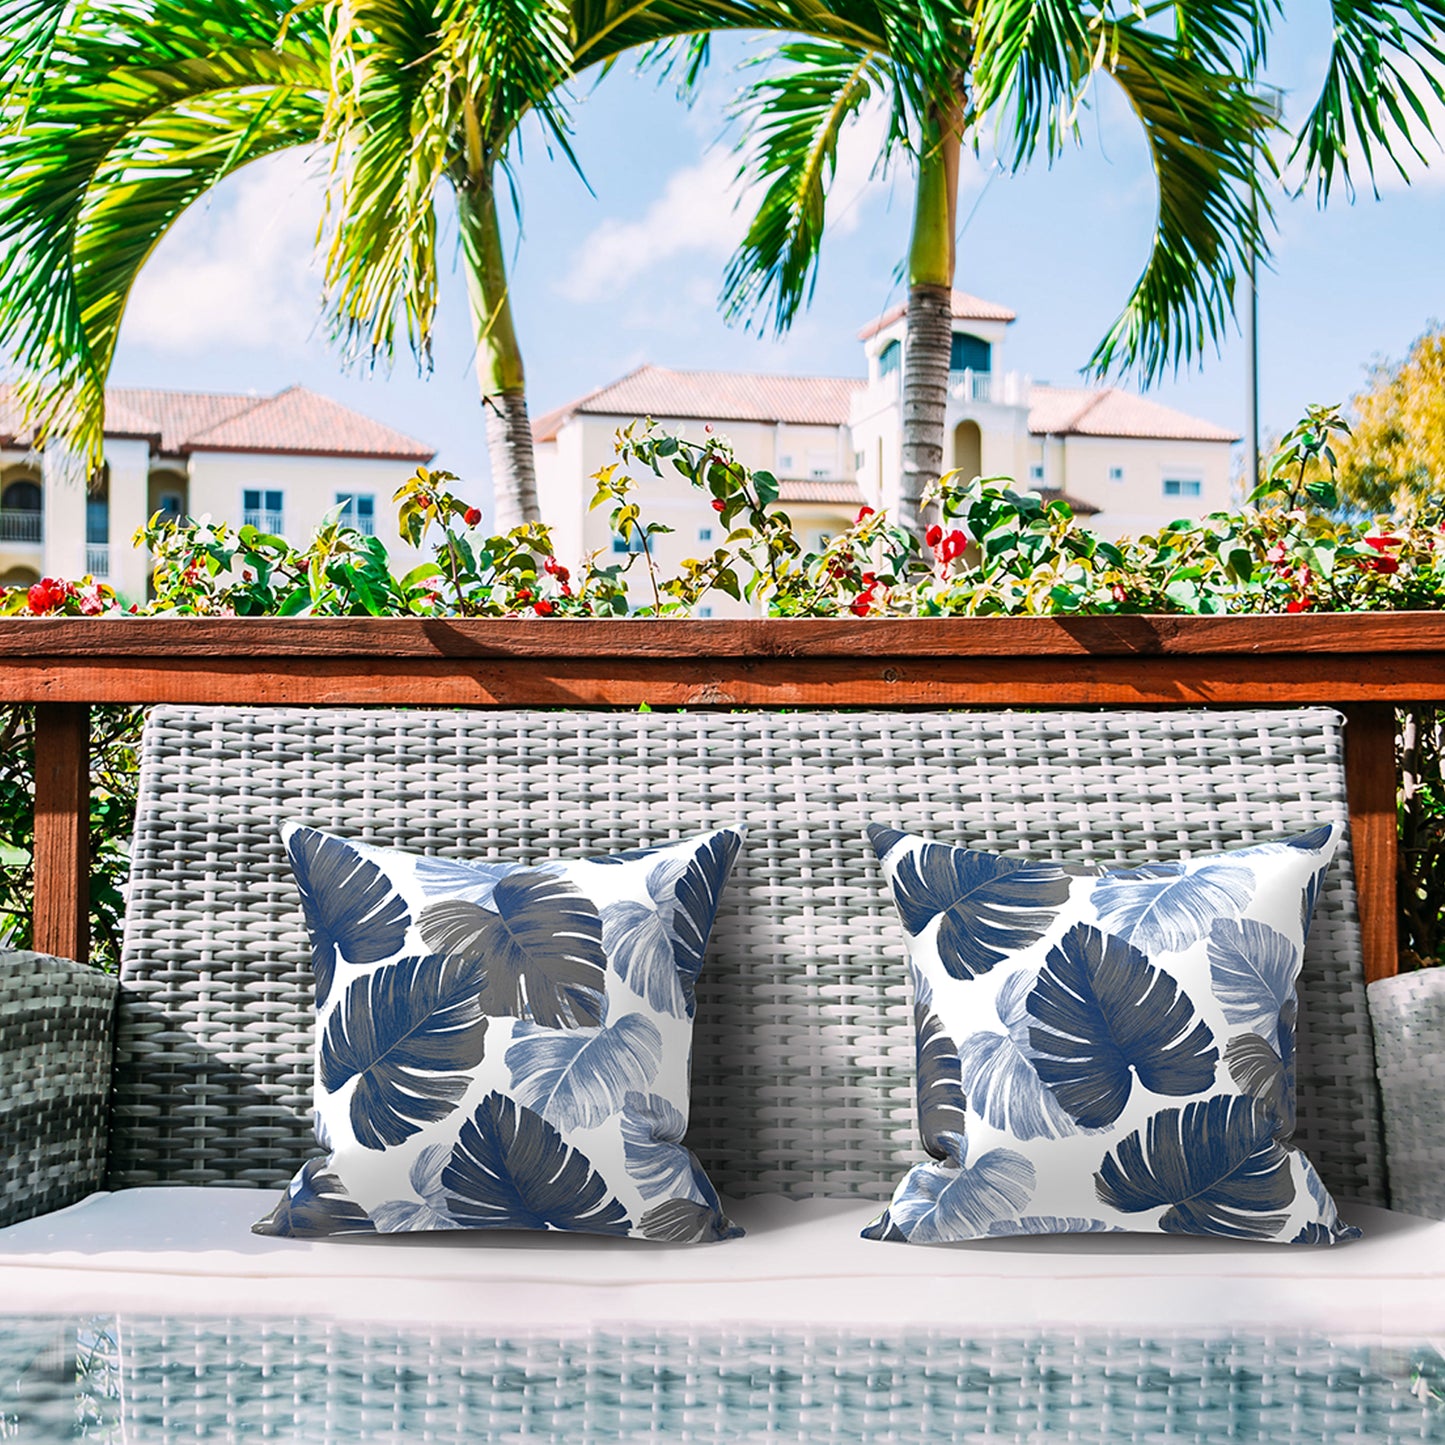 Melody Elephant Patio Throw Pillows with Inners, Fade Resistant Square Pillow Pack of 2, Decorative Garden Cushions for Home, 18x18 Inch, Monstera Blue